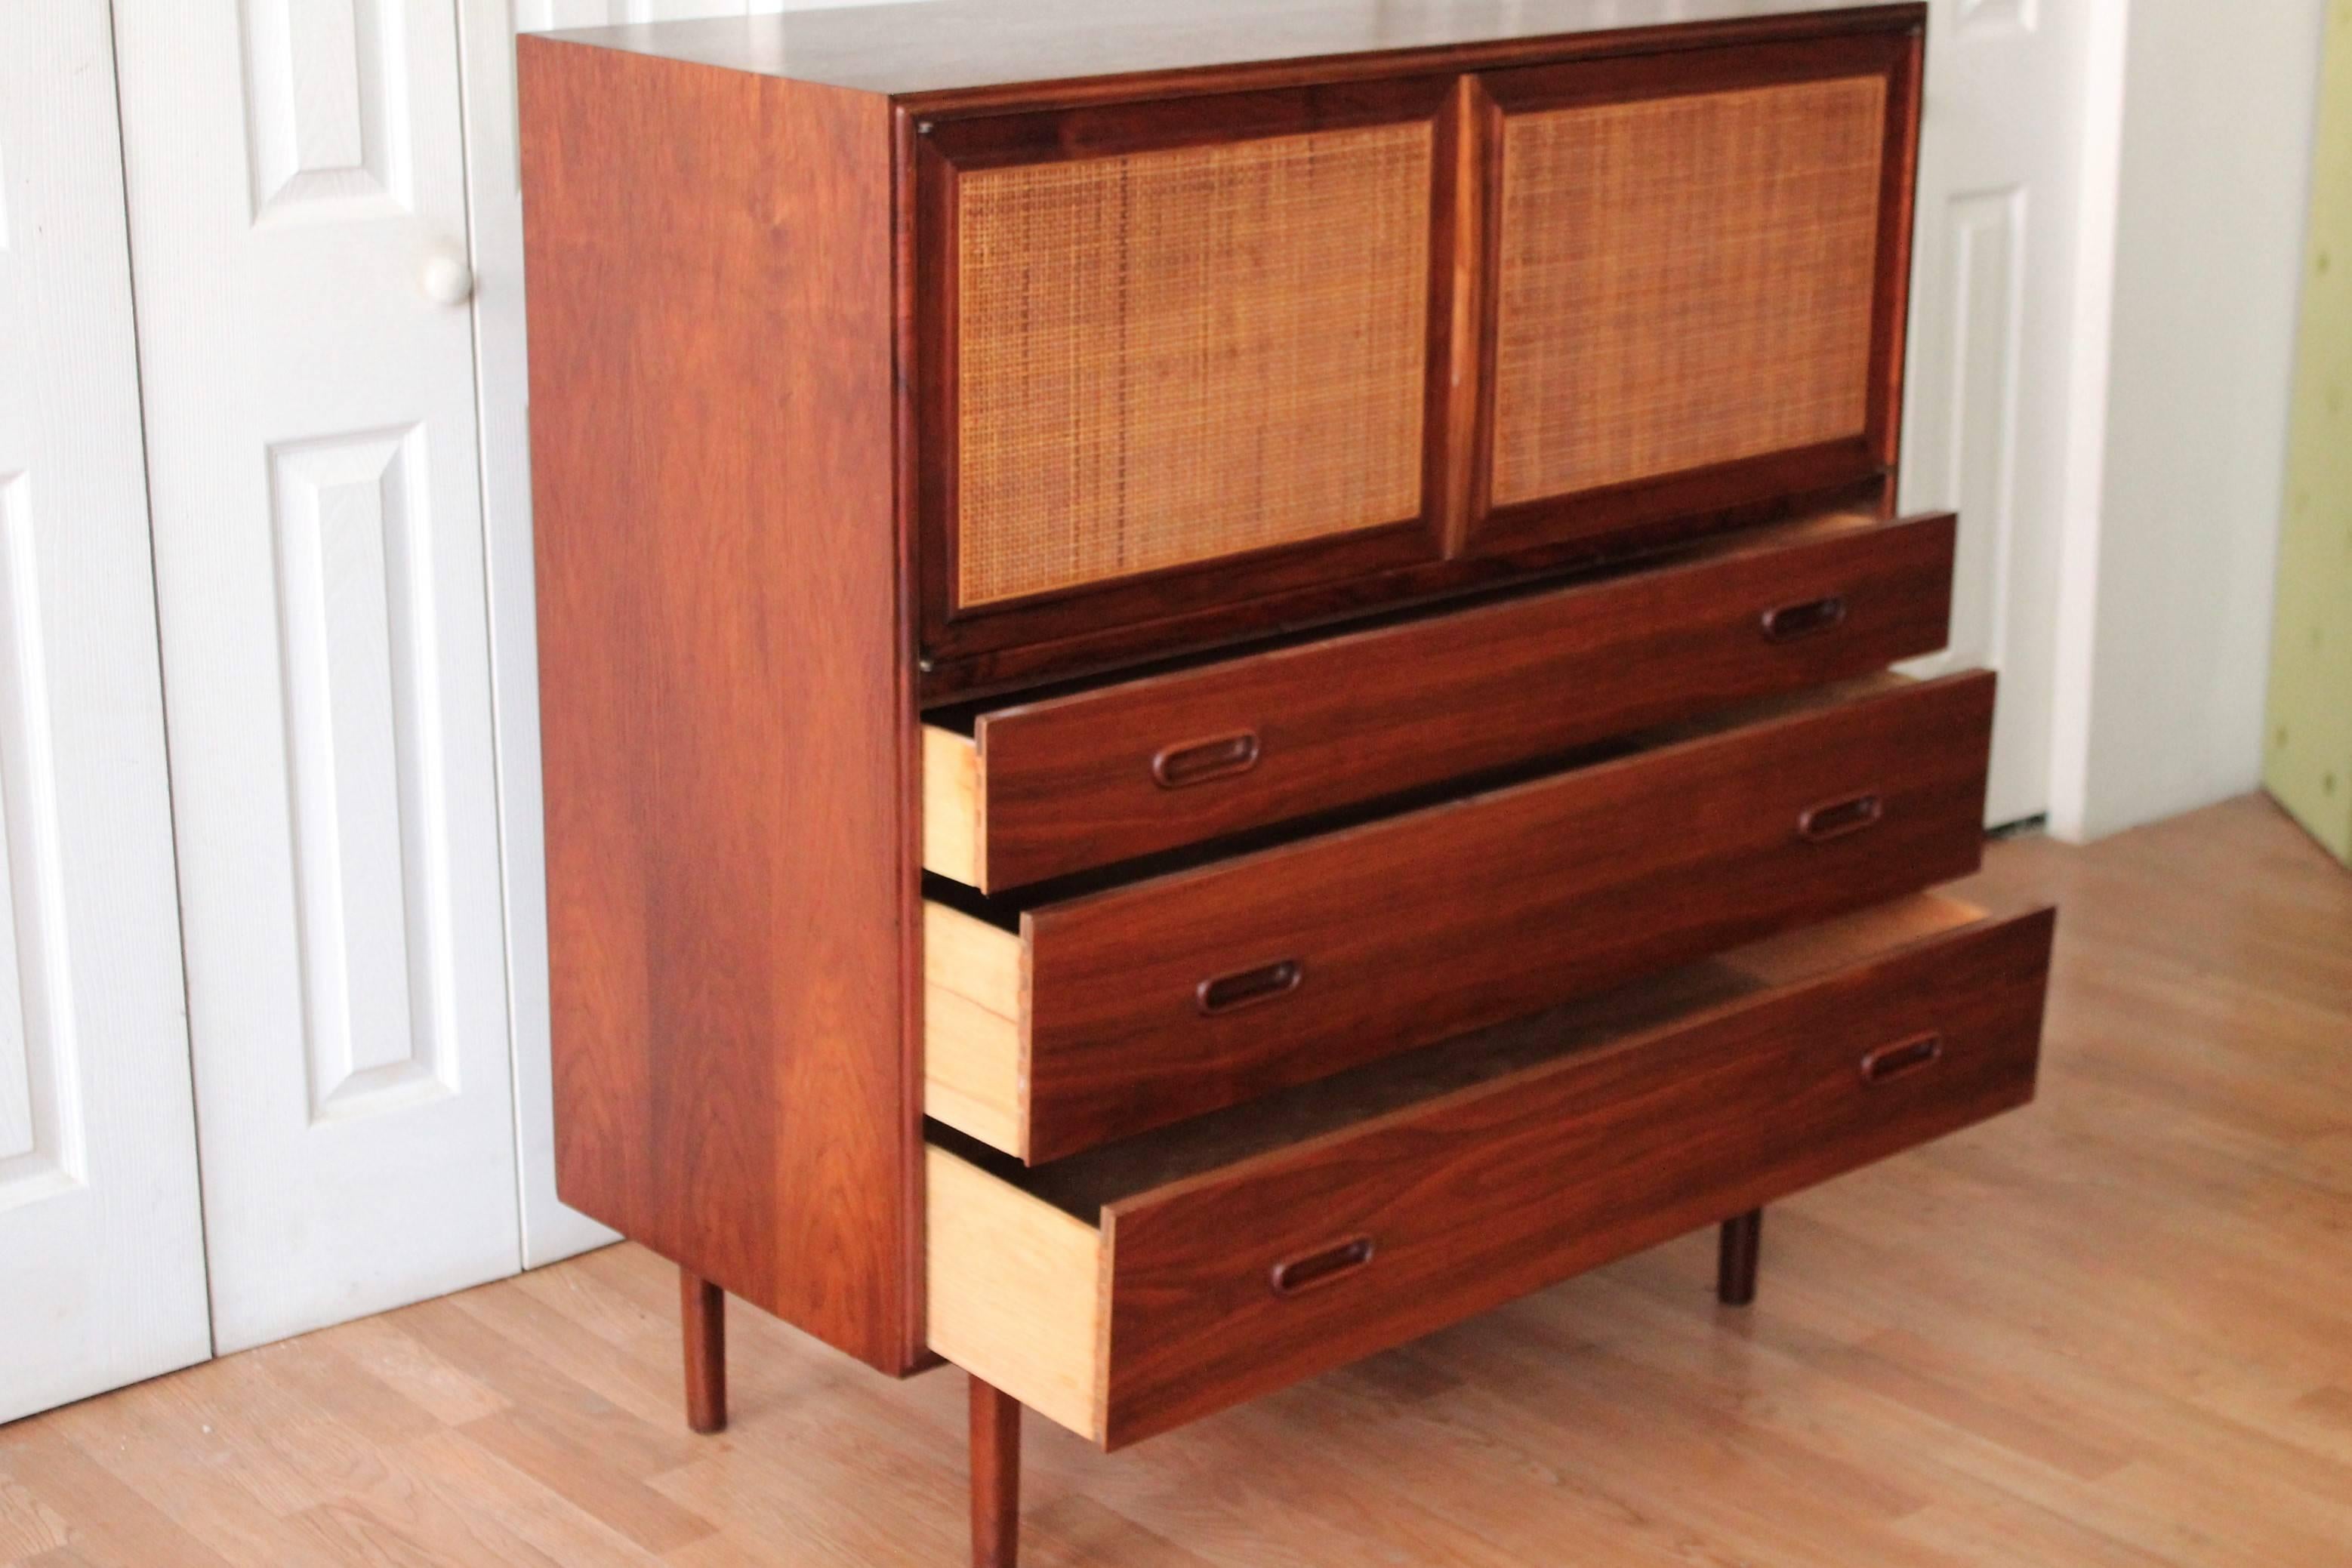 Original finish walnut highboy designed by Jack Cartwright for Founders. Ladies and gentlemen, it just doesn't get any better than this! 

Walnut Mid-Century Modern highboy with three graduating drawers, two cane front doors that open at chest